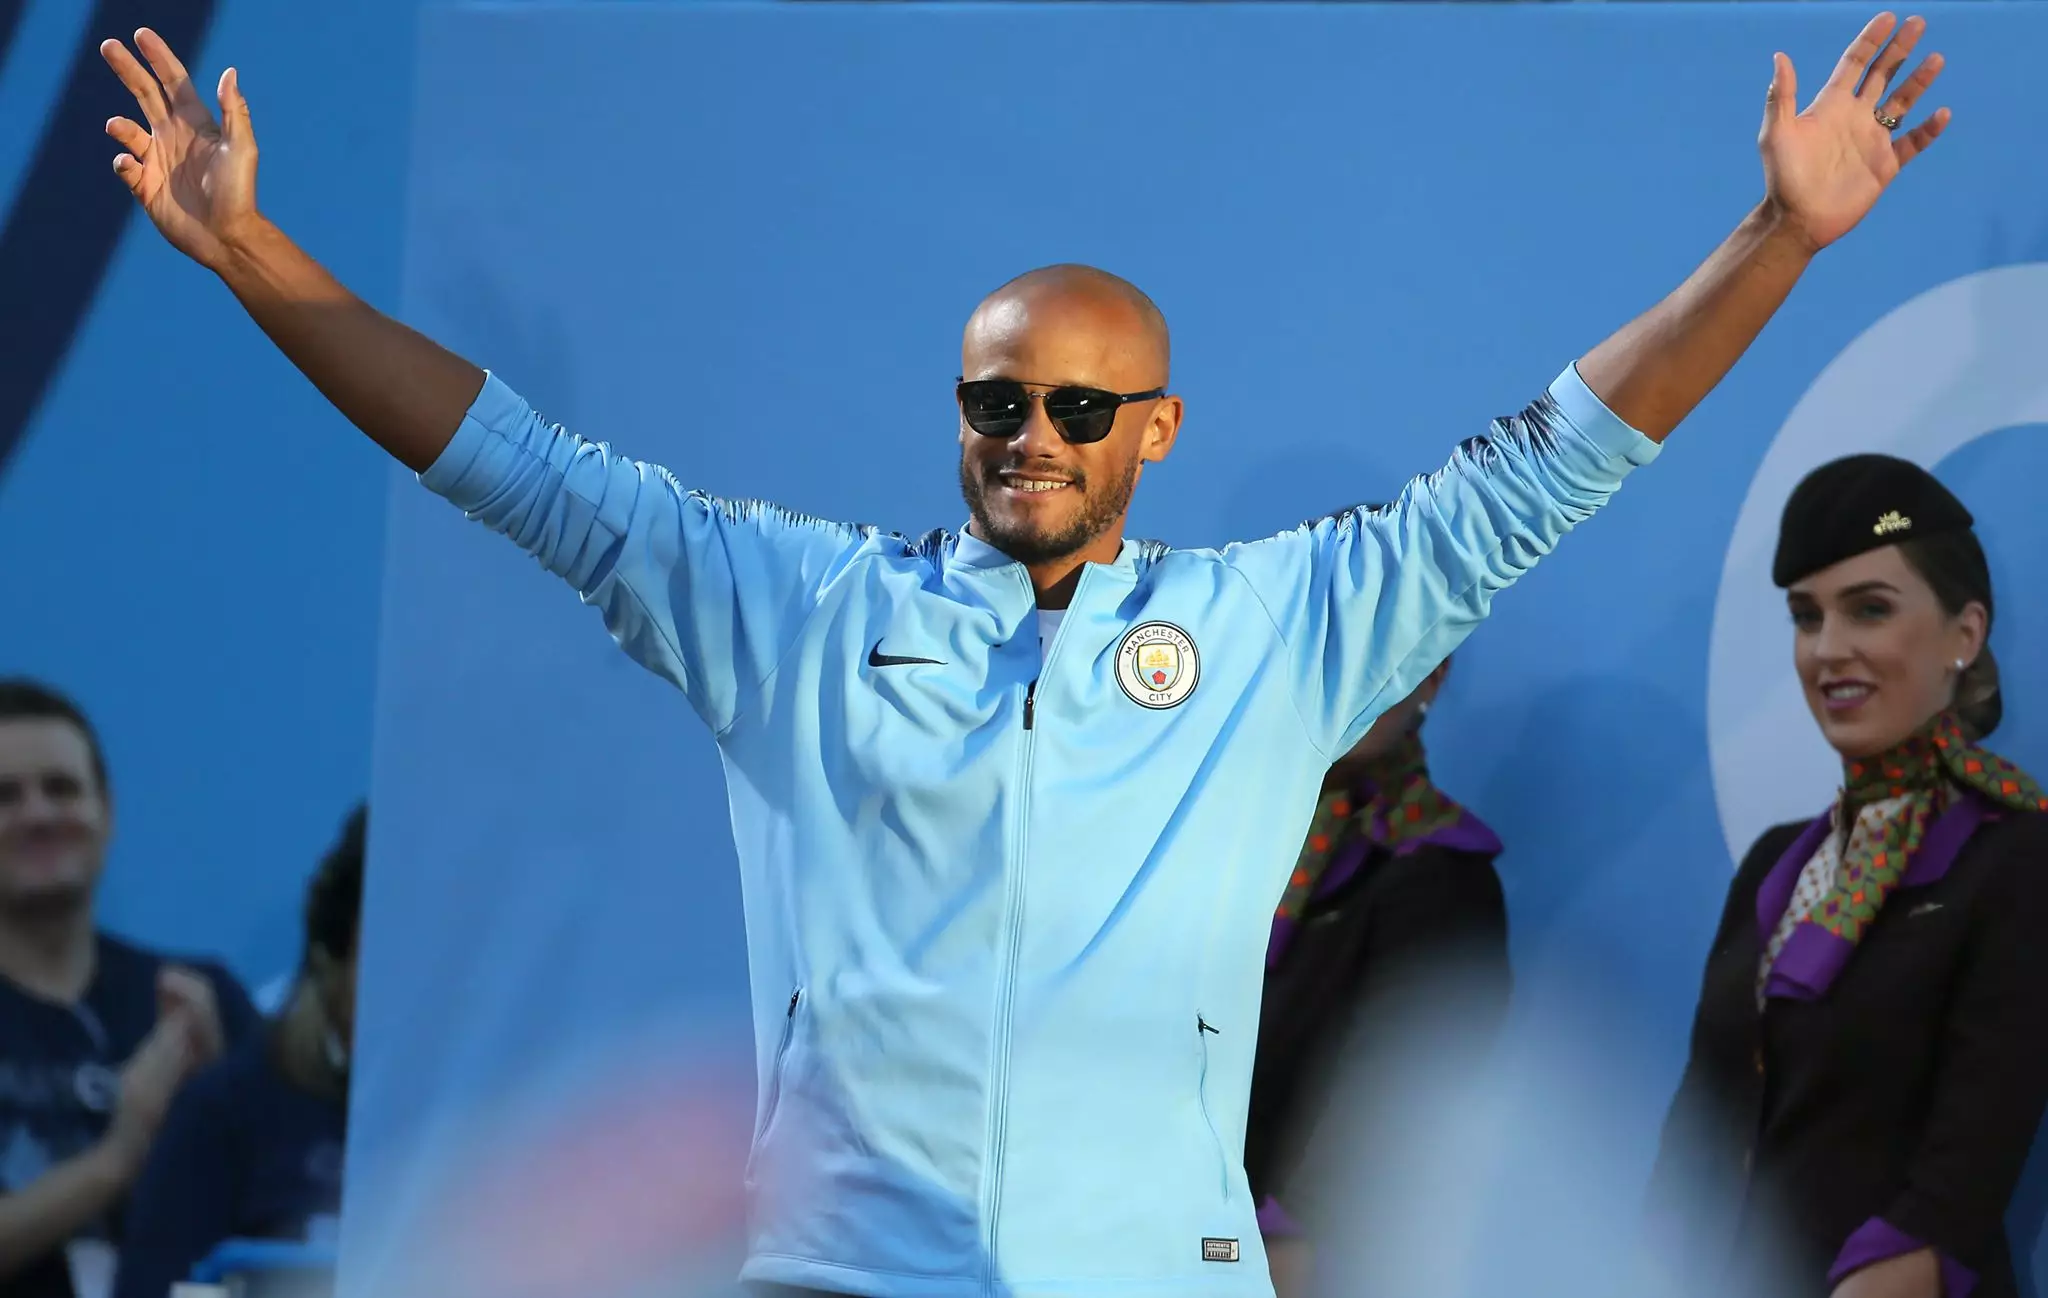 Kompany's been a great part of City's success. Image: PA Images